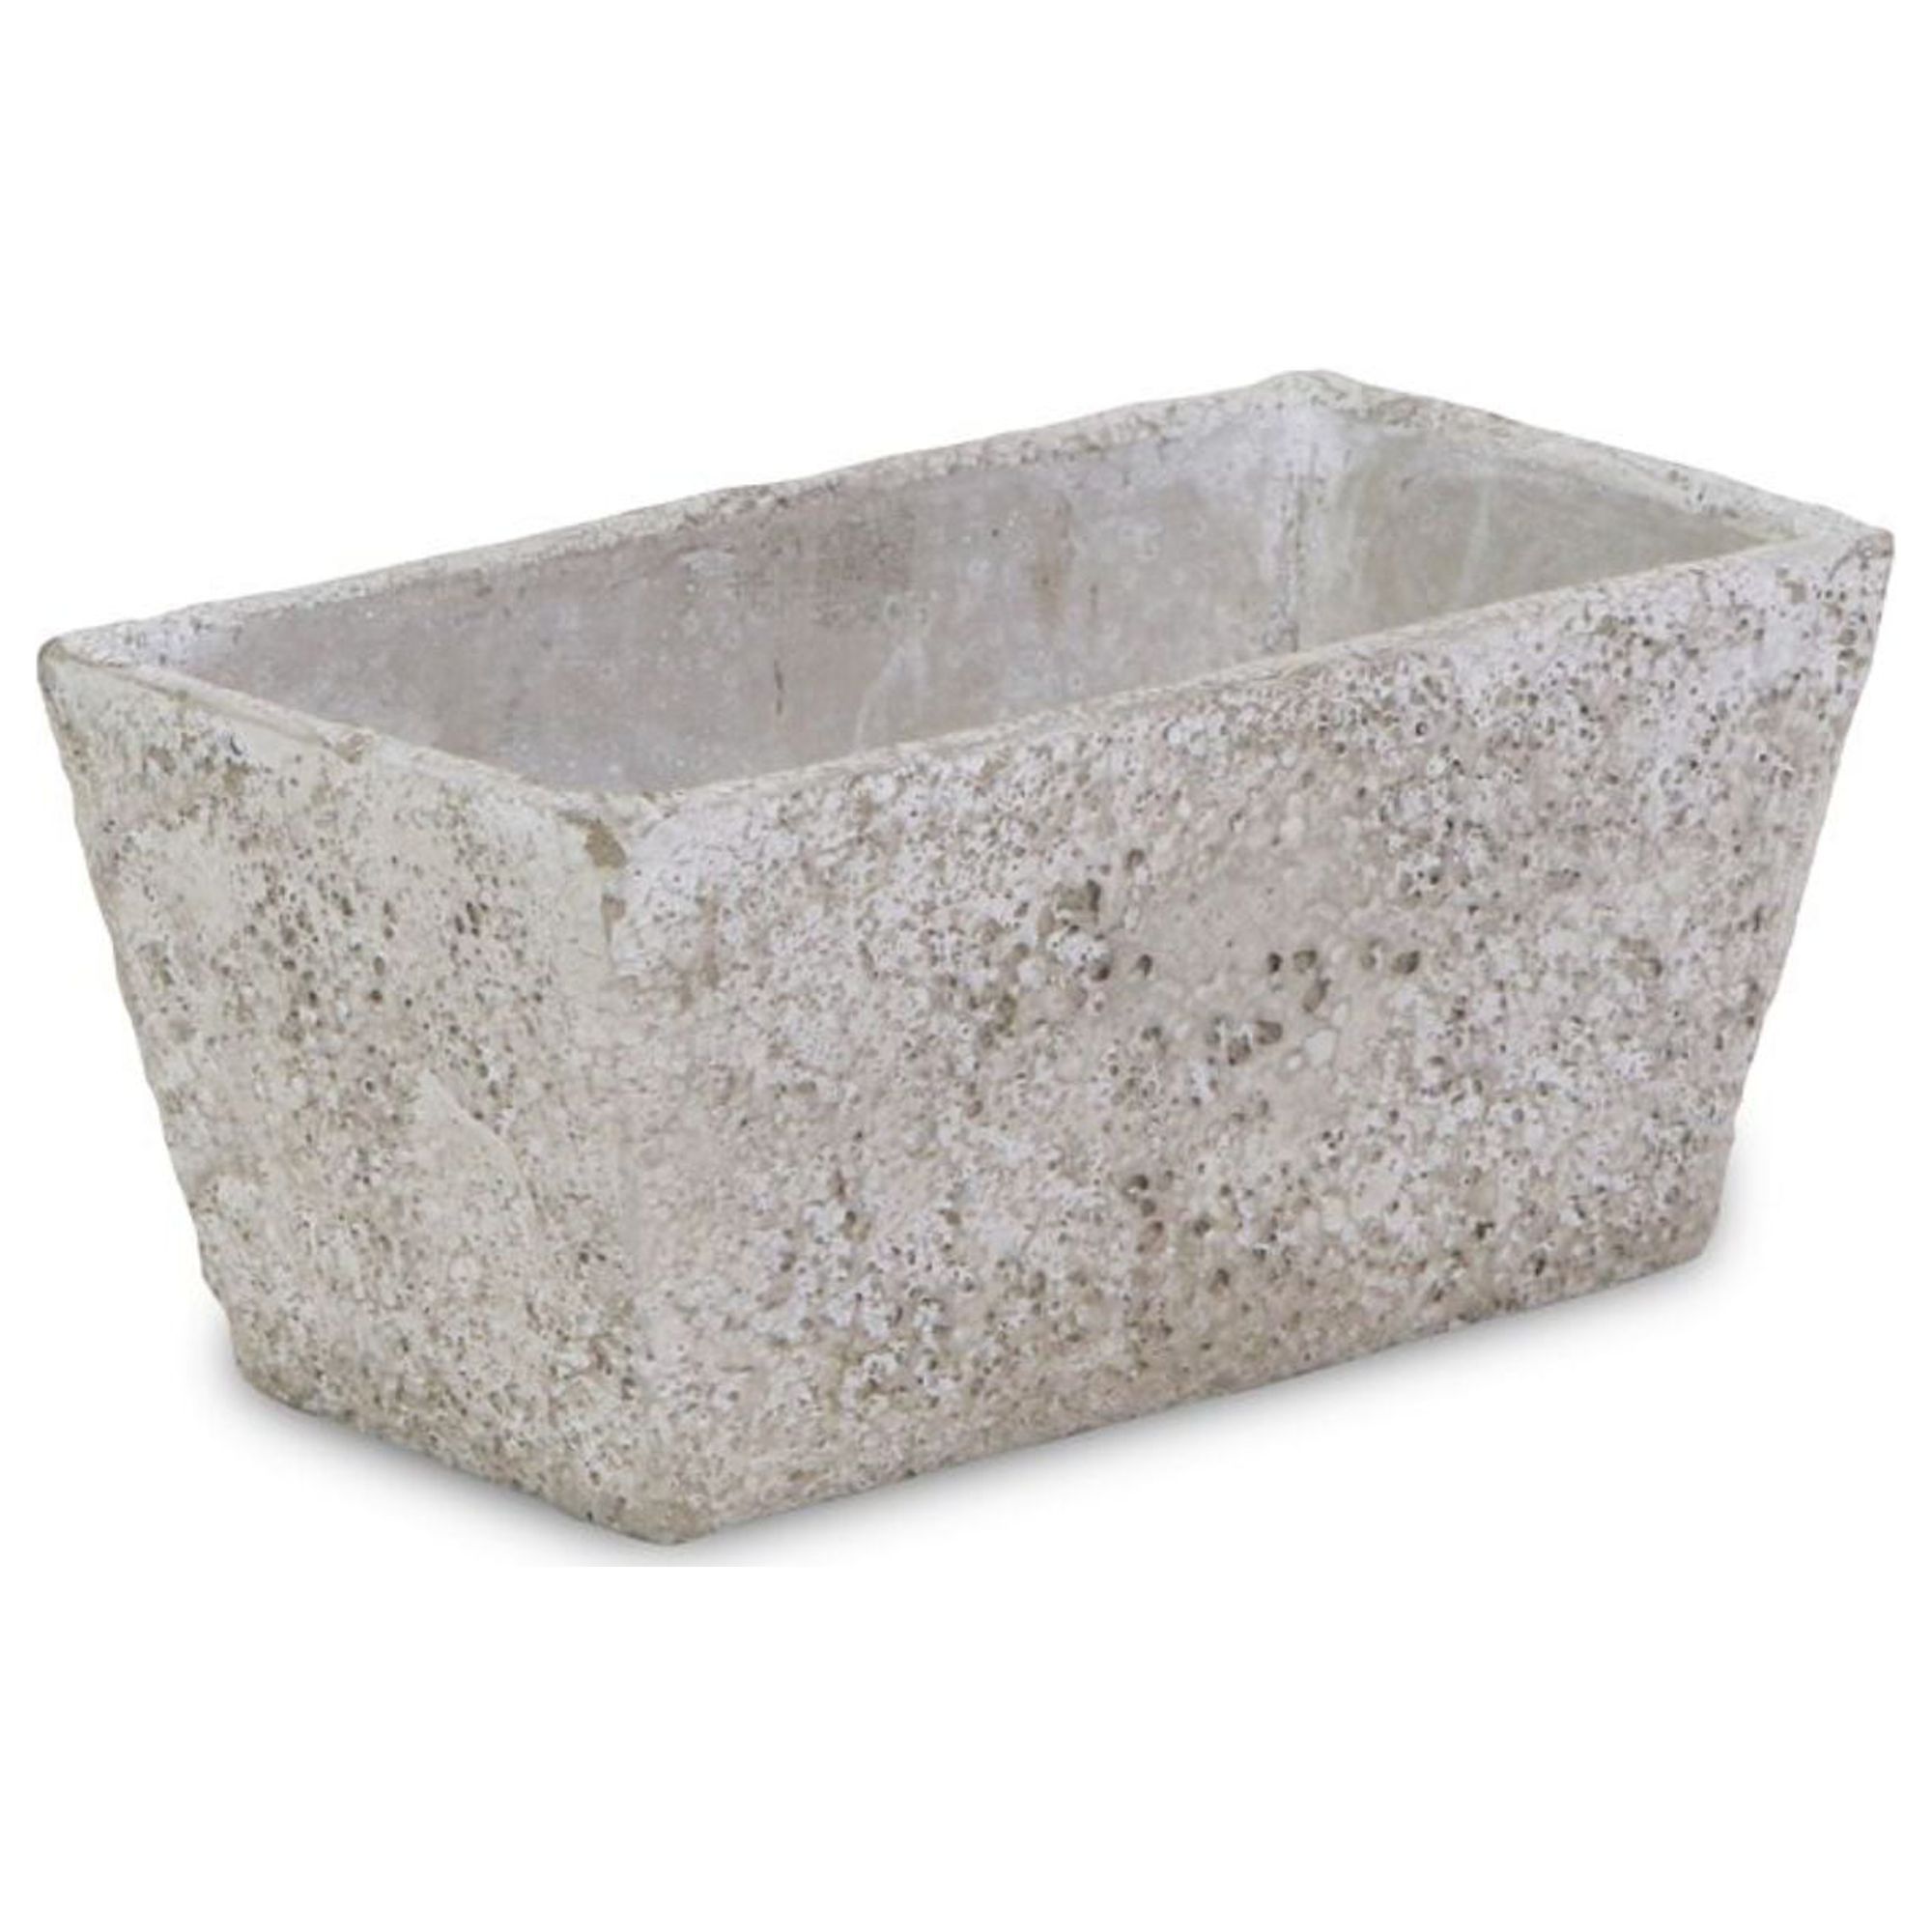 Contemporary Home Living 9.25" Gray Distressed Finish Rectangular Hollow Planter Pot - image 2 of 4